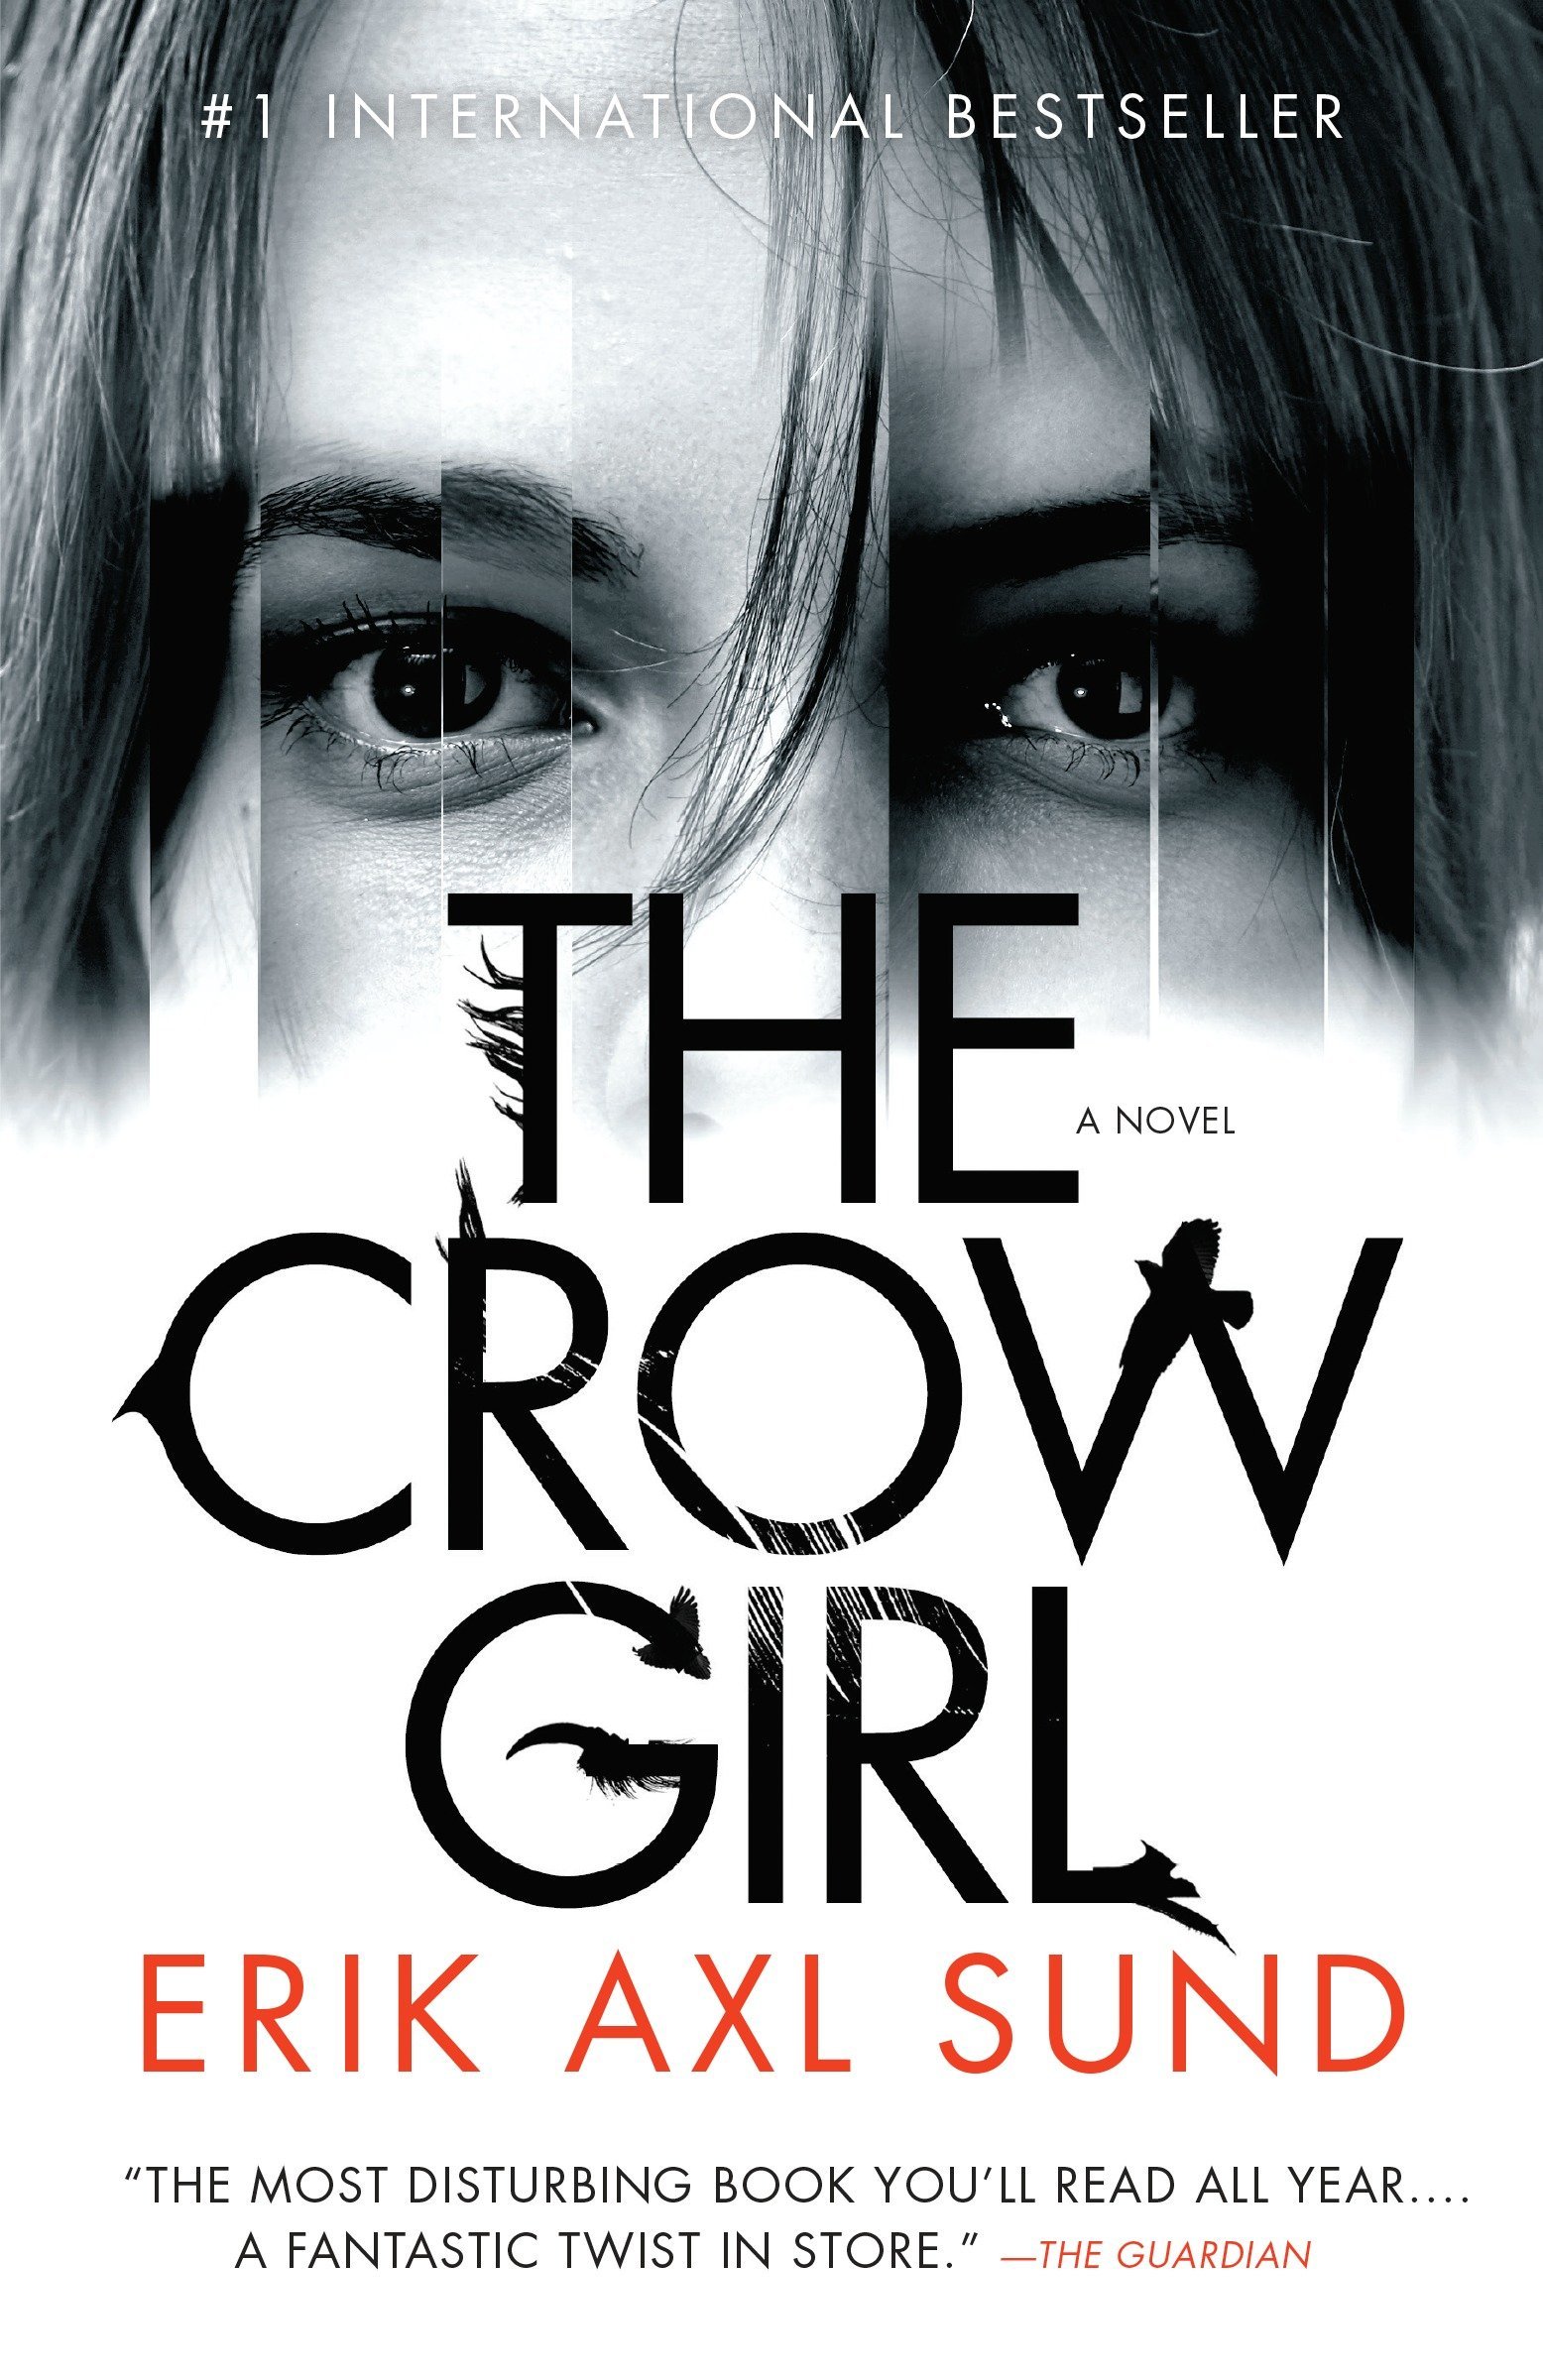 Cover of The Crow Girl by Erik Axl Sund 